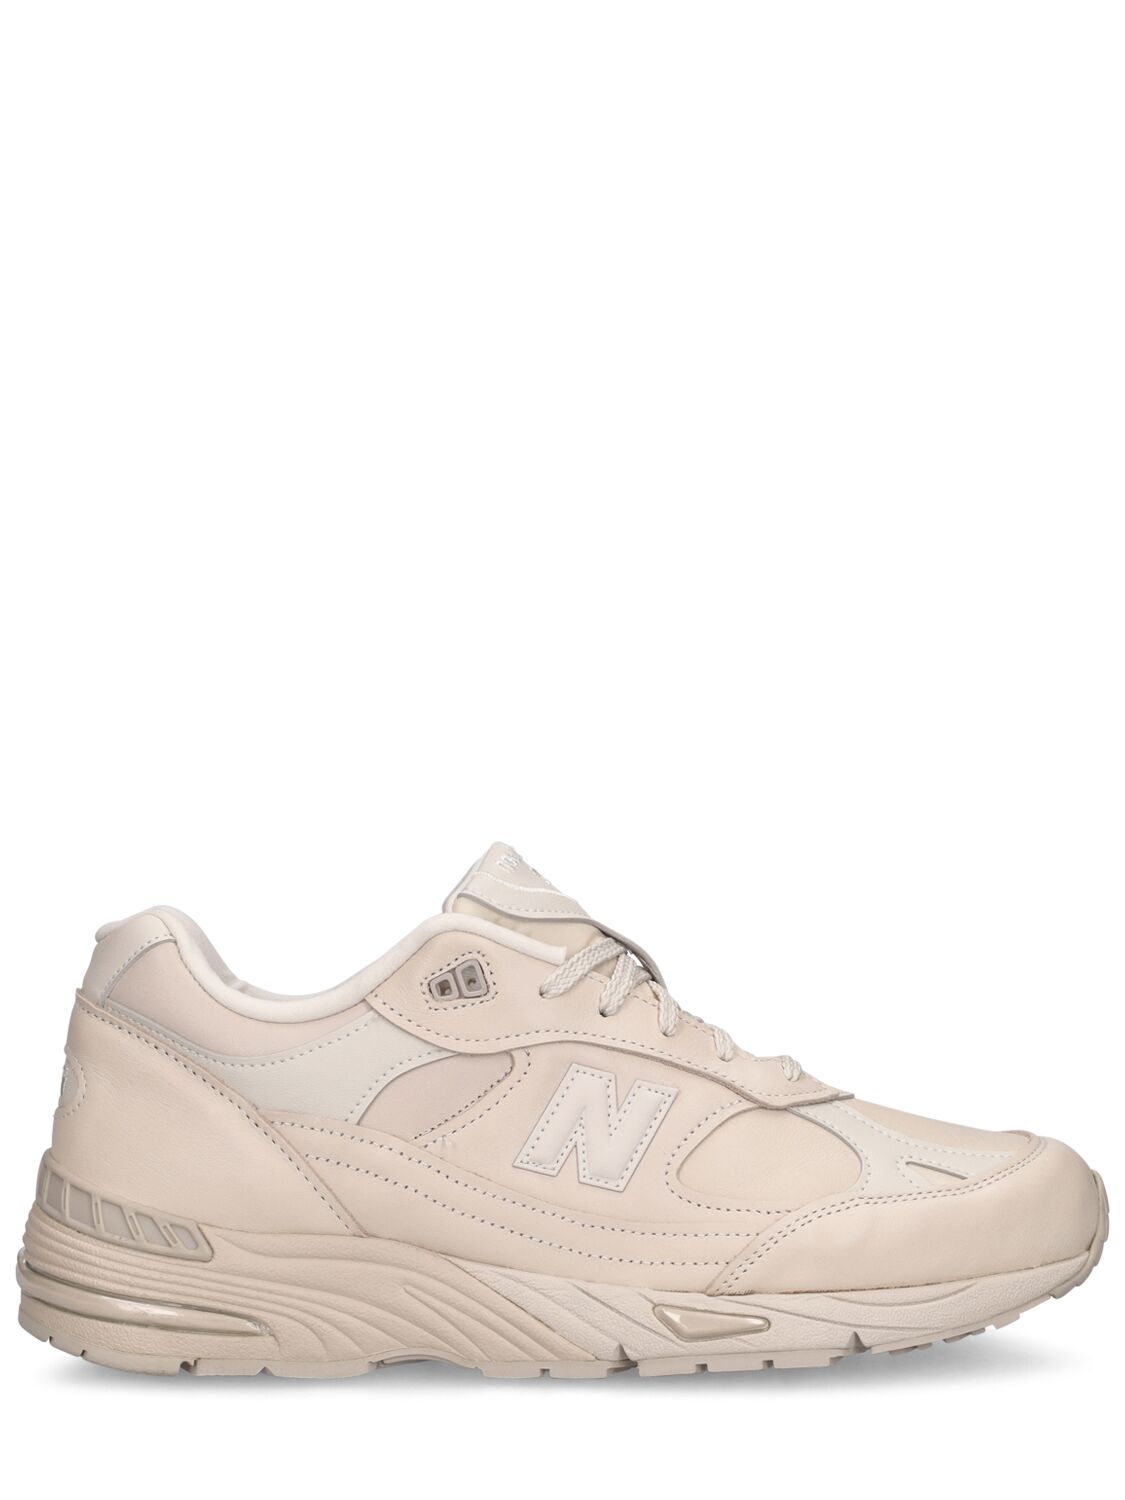 NEW BALANCE 991 MADE IN UK SNEAKERS